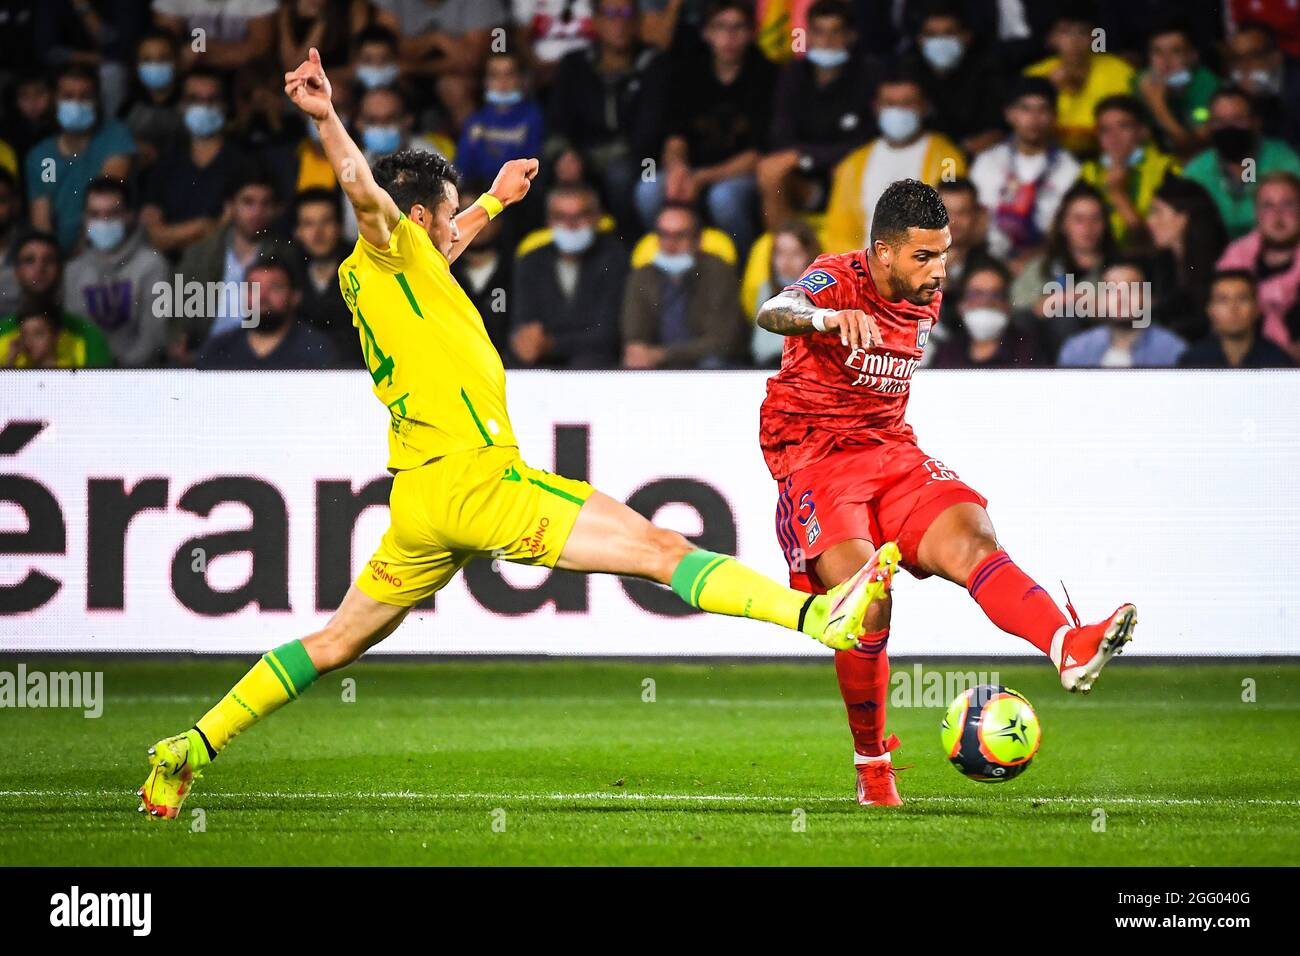 Emerson PALMIERI DOS SANTOS of Lyon during the French championship Ligue 1 football match between FC Nantes and Olympique Lyonnais on August 27, 2021 at La Beaujoire - Louis Fonteneau stadium in Nantes, France - Photo Matthieu Mirville / DPPI Stock Photo